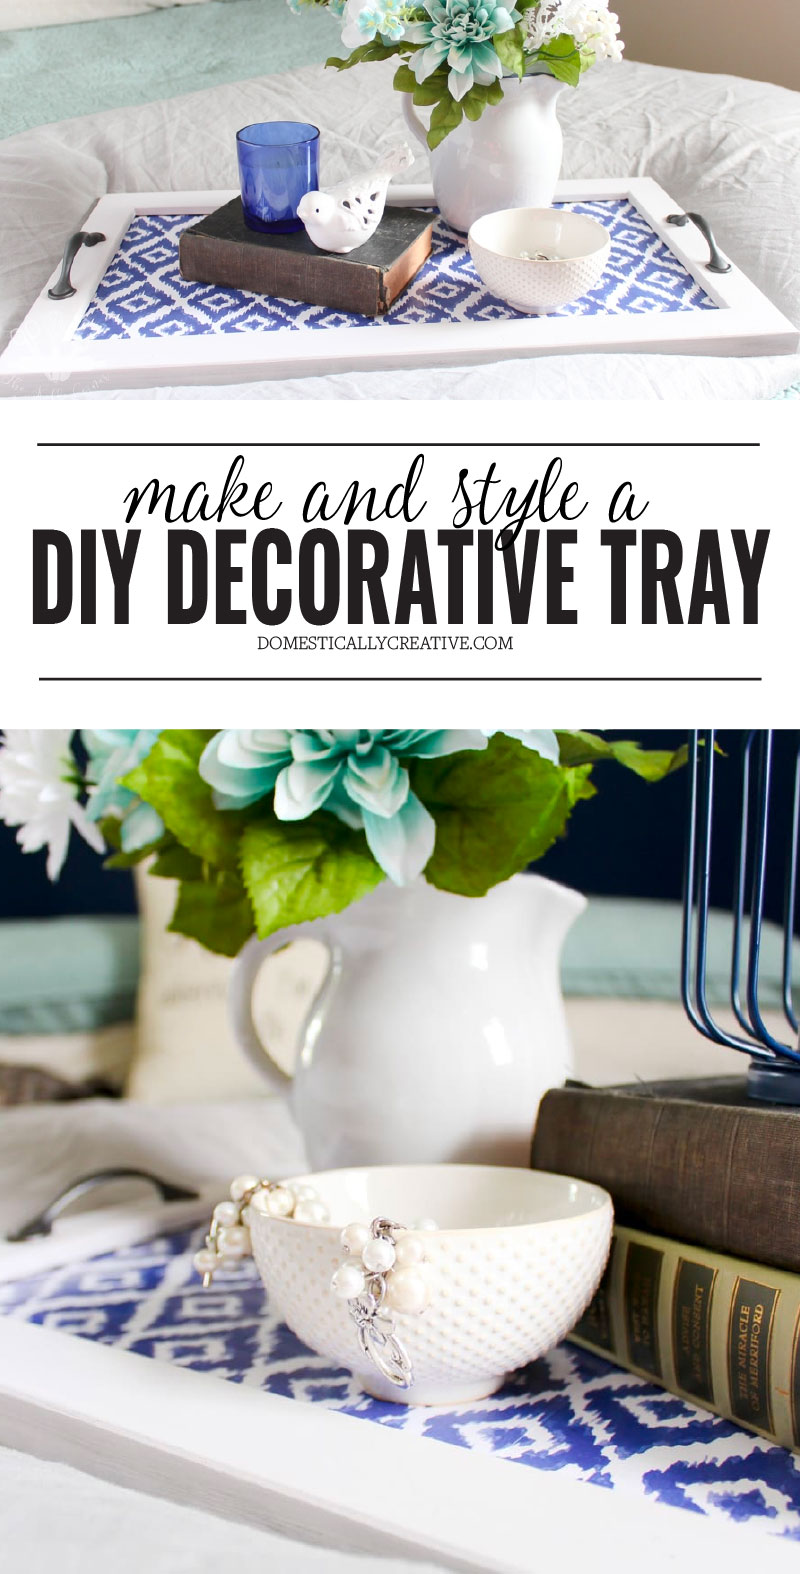 How to Make and Style a Decorative Tray